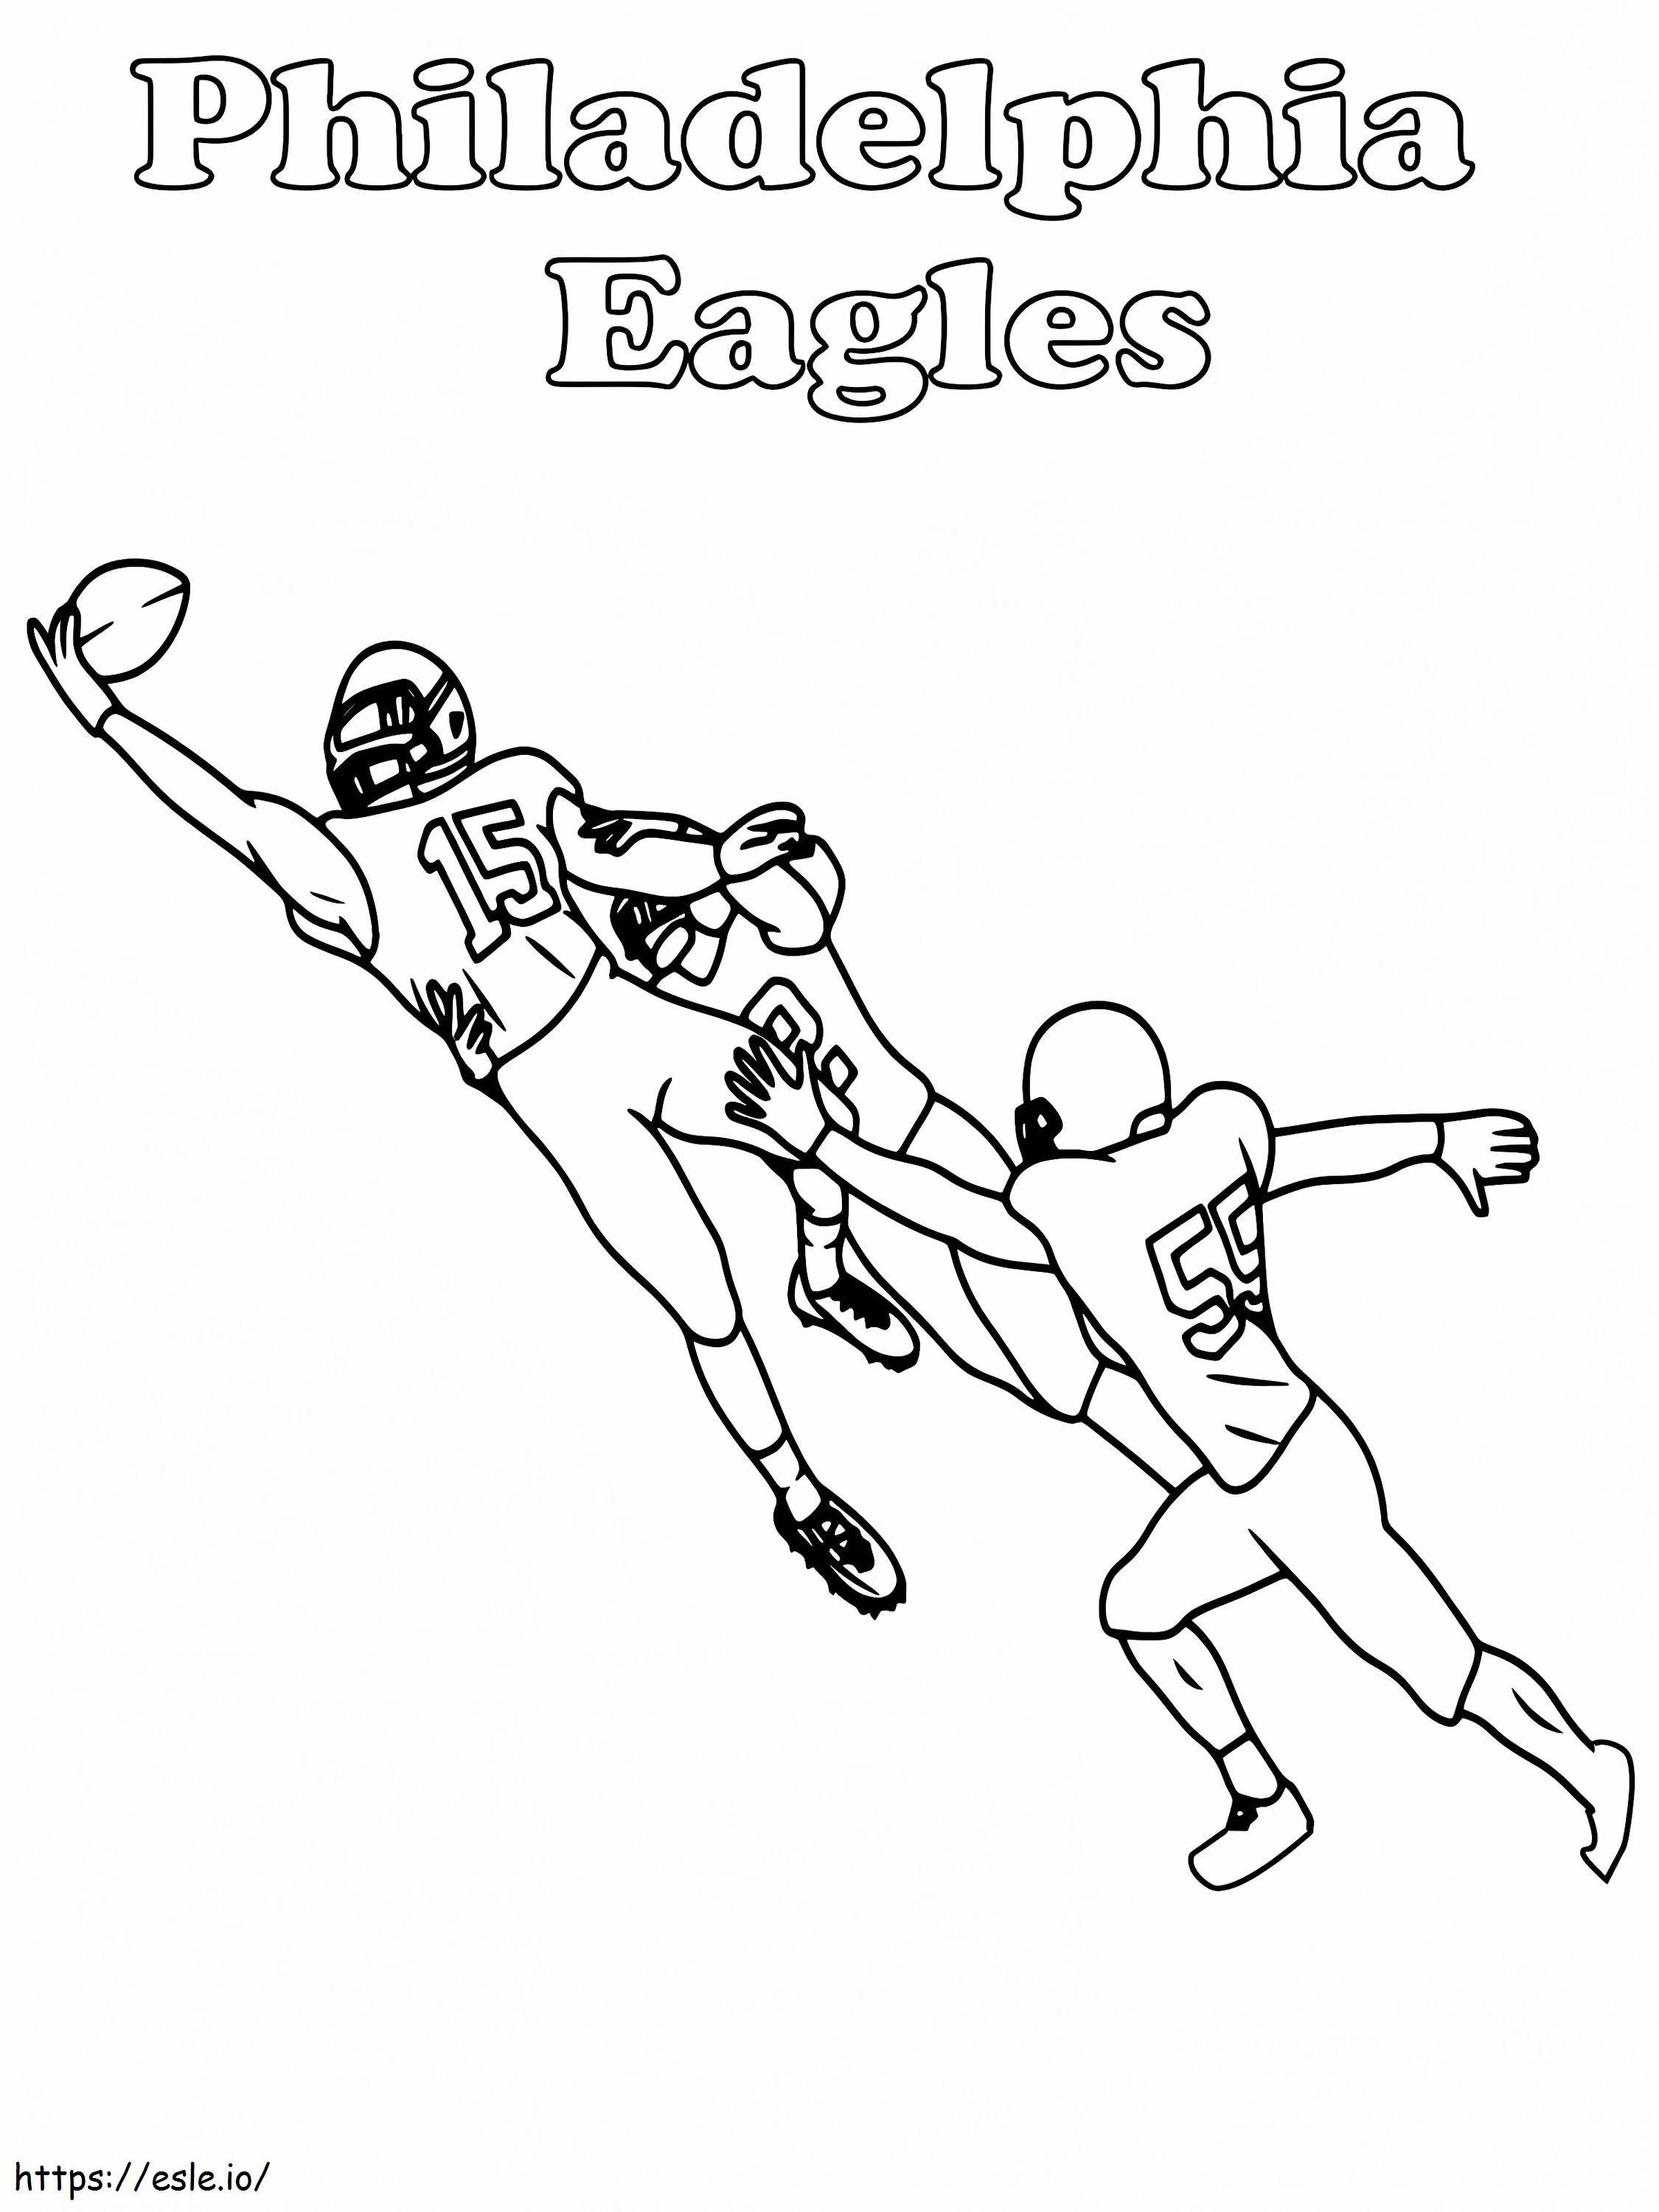 Philadelphia Eagles Player Catch coloring page